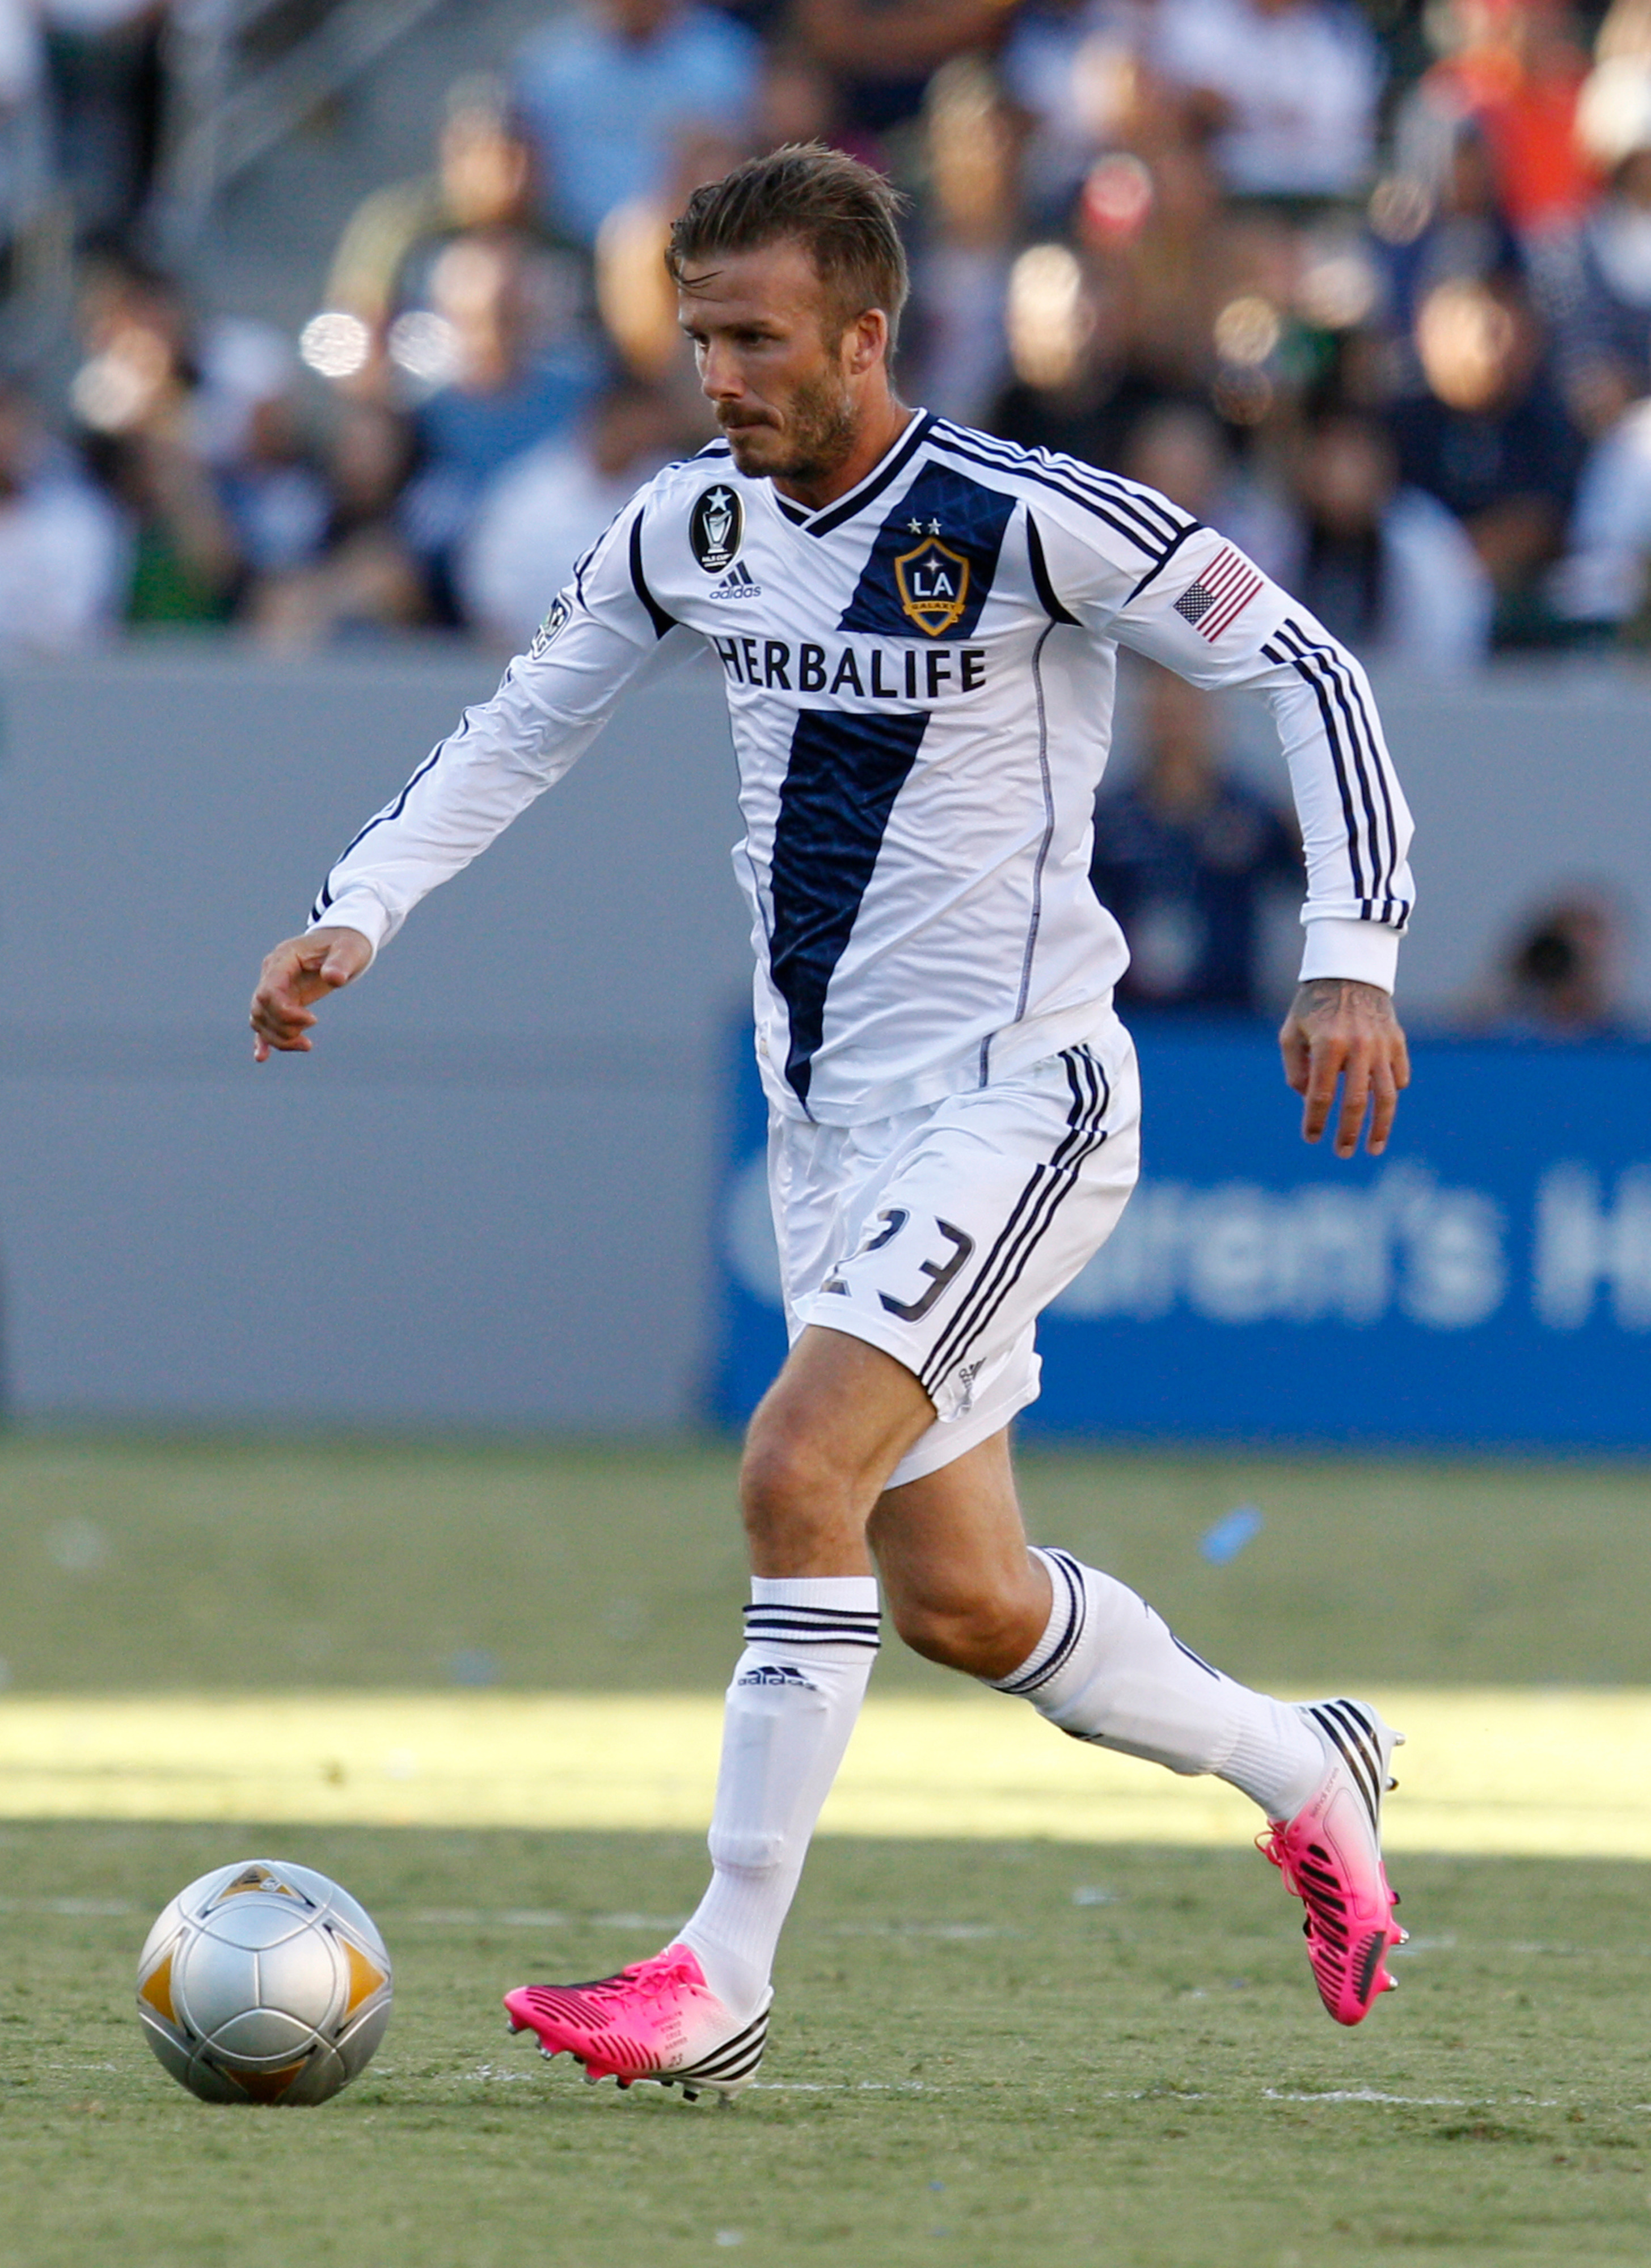 CARSON, CA - AUGUST 26: David Beckham #23 of Los Angeles Galaxy dribbles the ball during the MLS match against FC Dallas at The Home Depot Center on August 26, 2012 in Carson, California. The Galaxy won 2-0. (Photo by Ric Tapia/Getty Images)